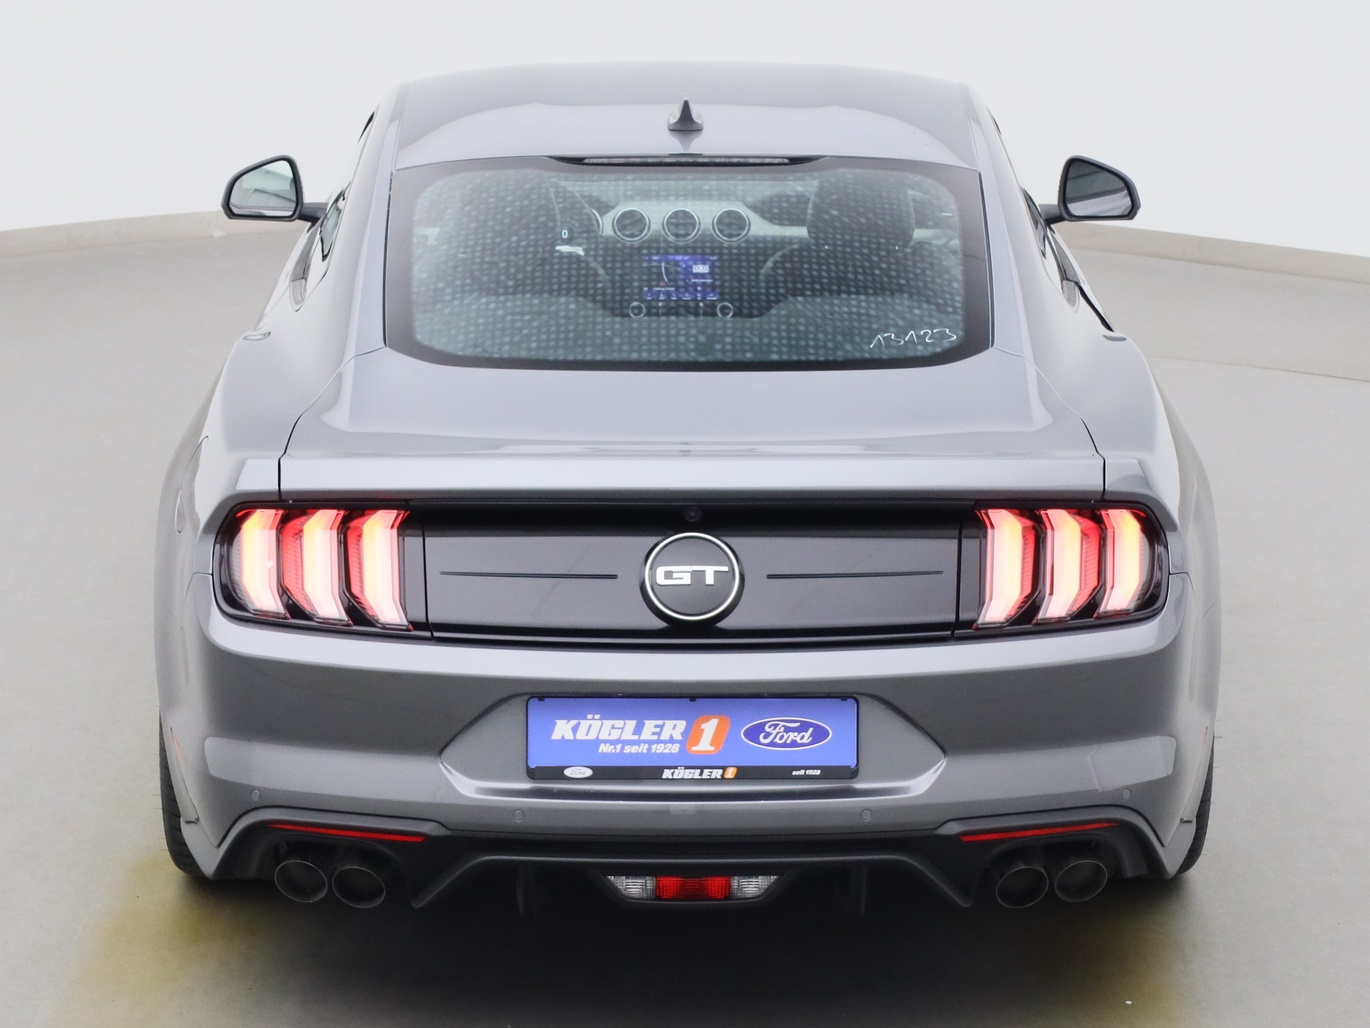  Ford Mustang GT Coupé V8 450PS / Premium 2 / Magne in Carbonized Gray 